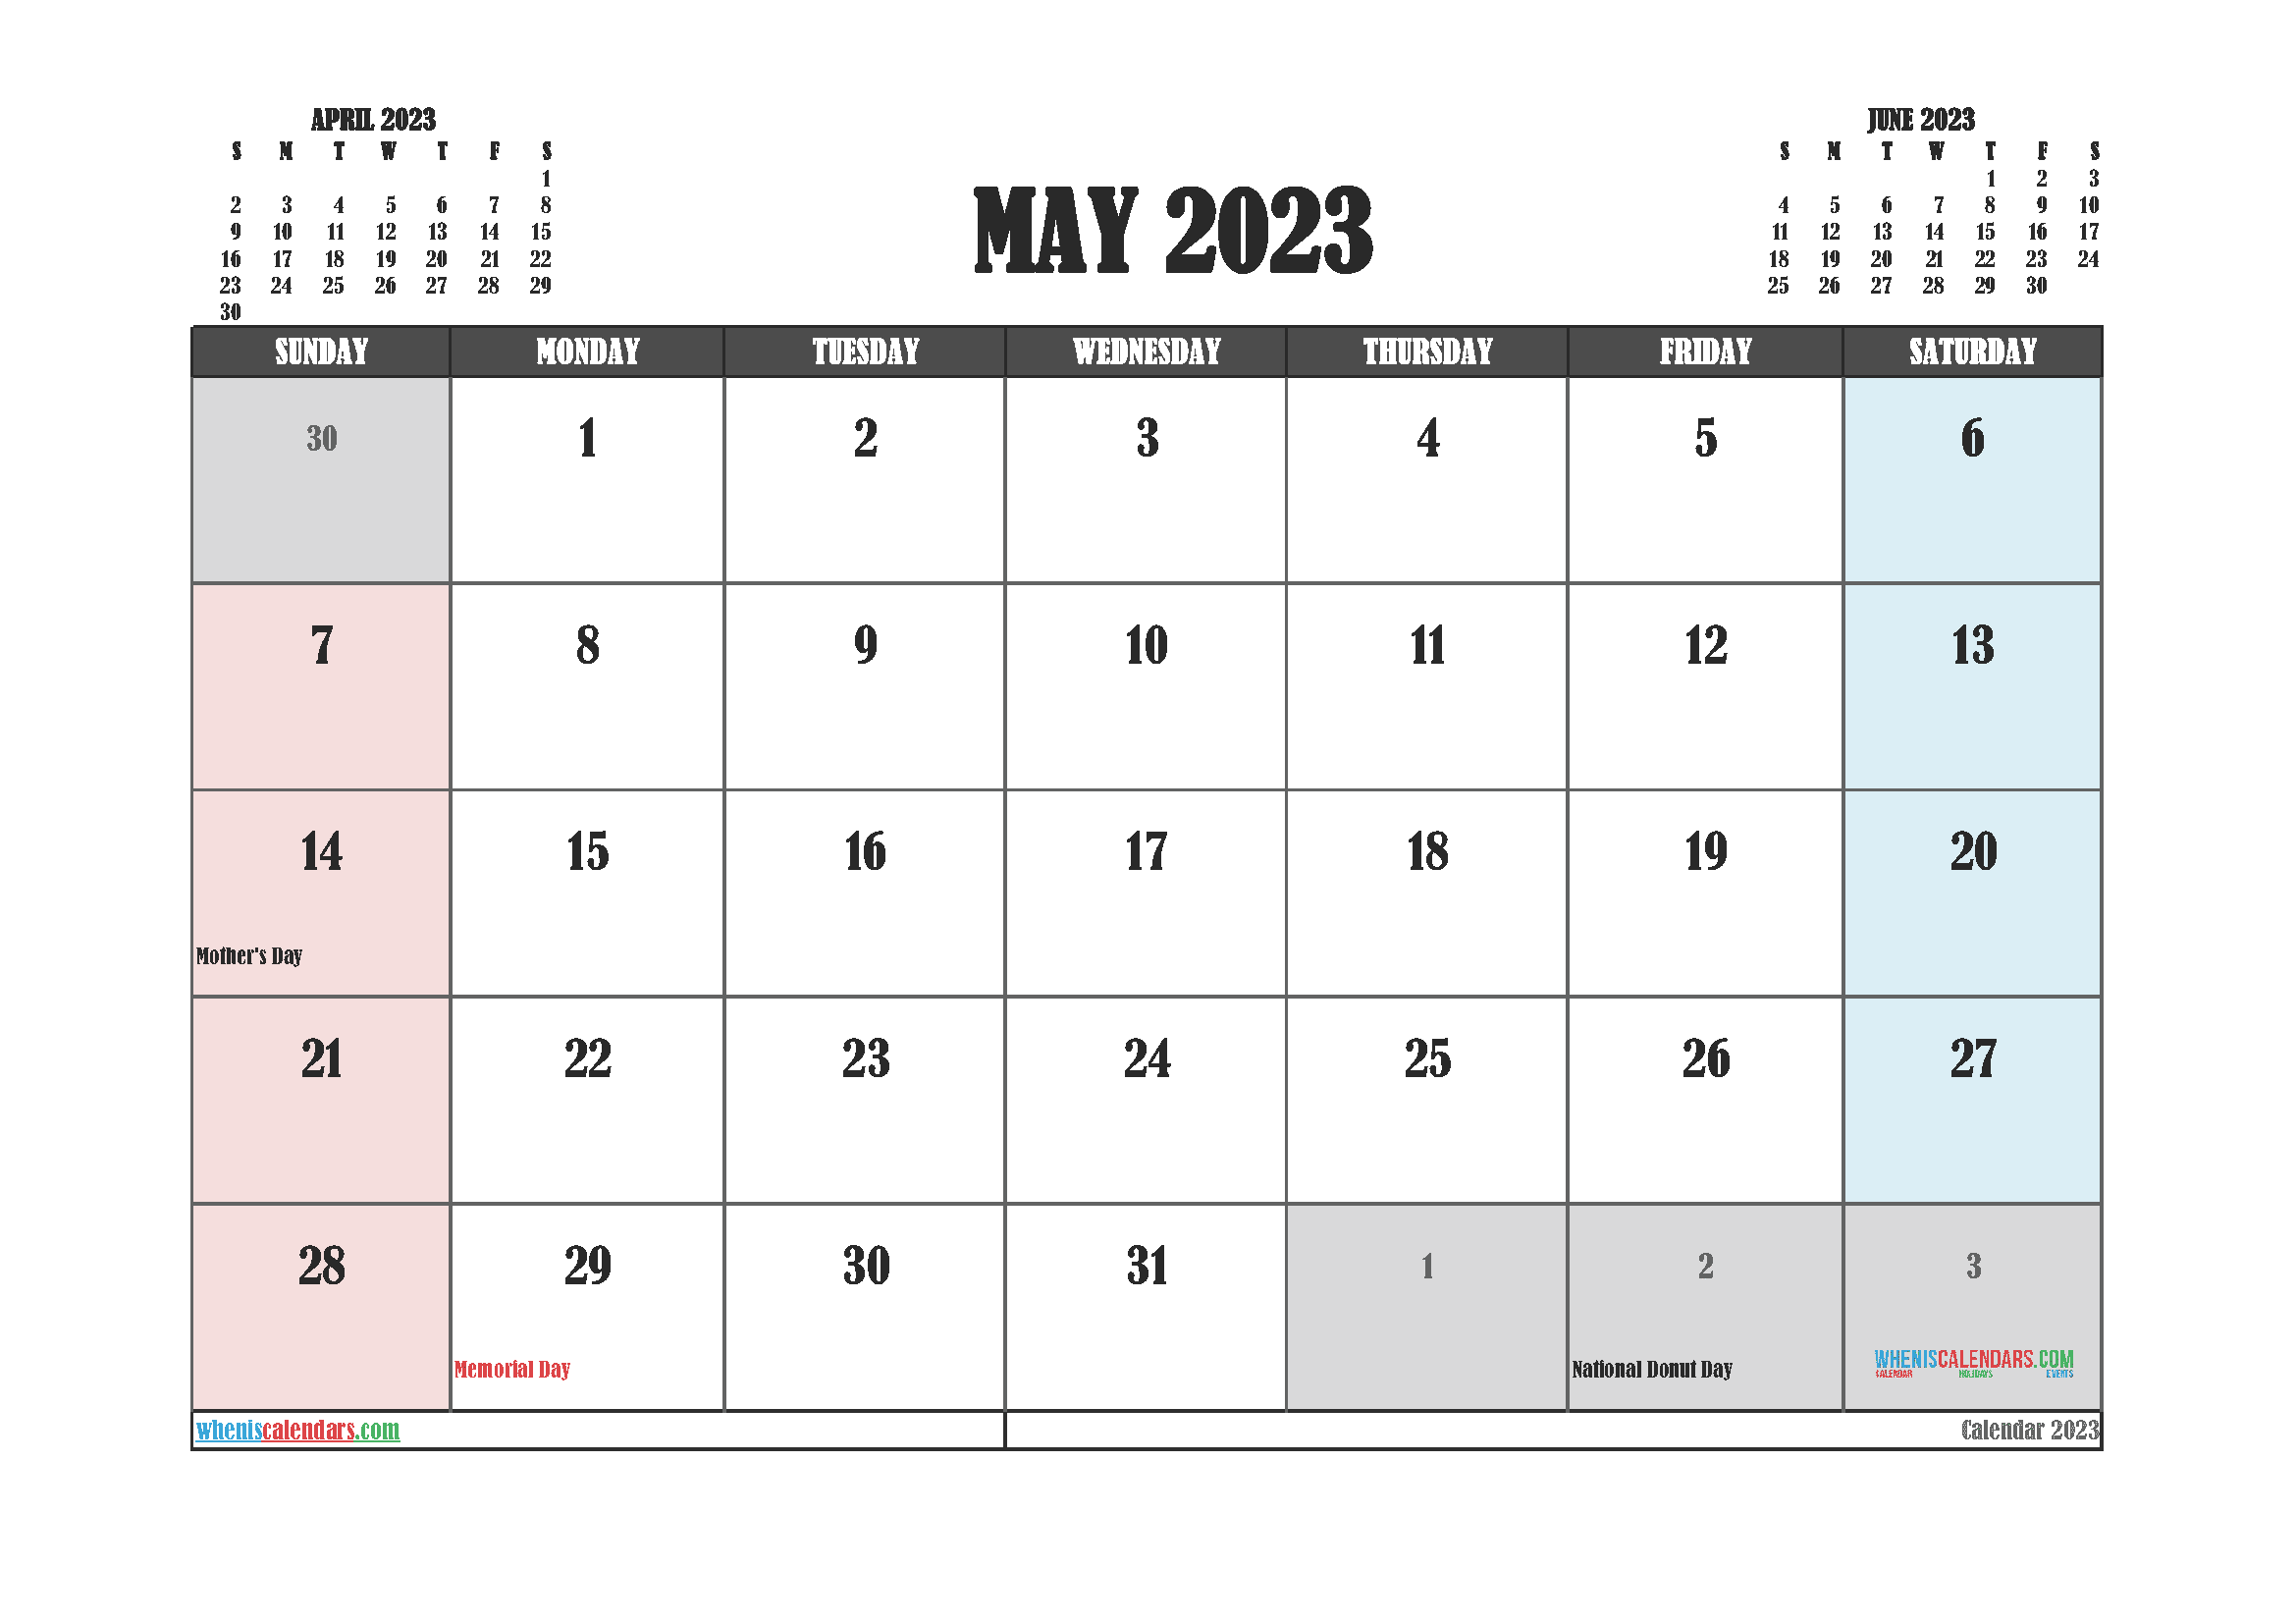 Free Calendar 2023 May with Holidays PDF in Landscape